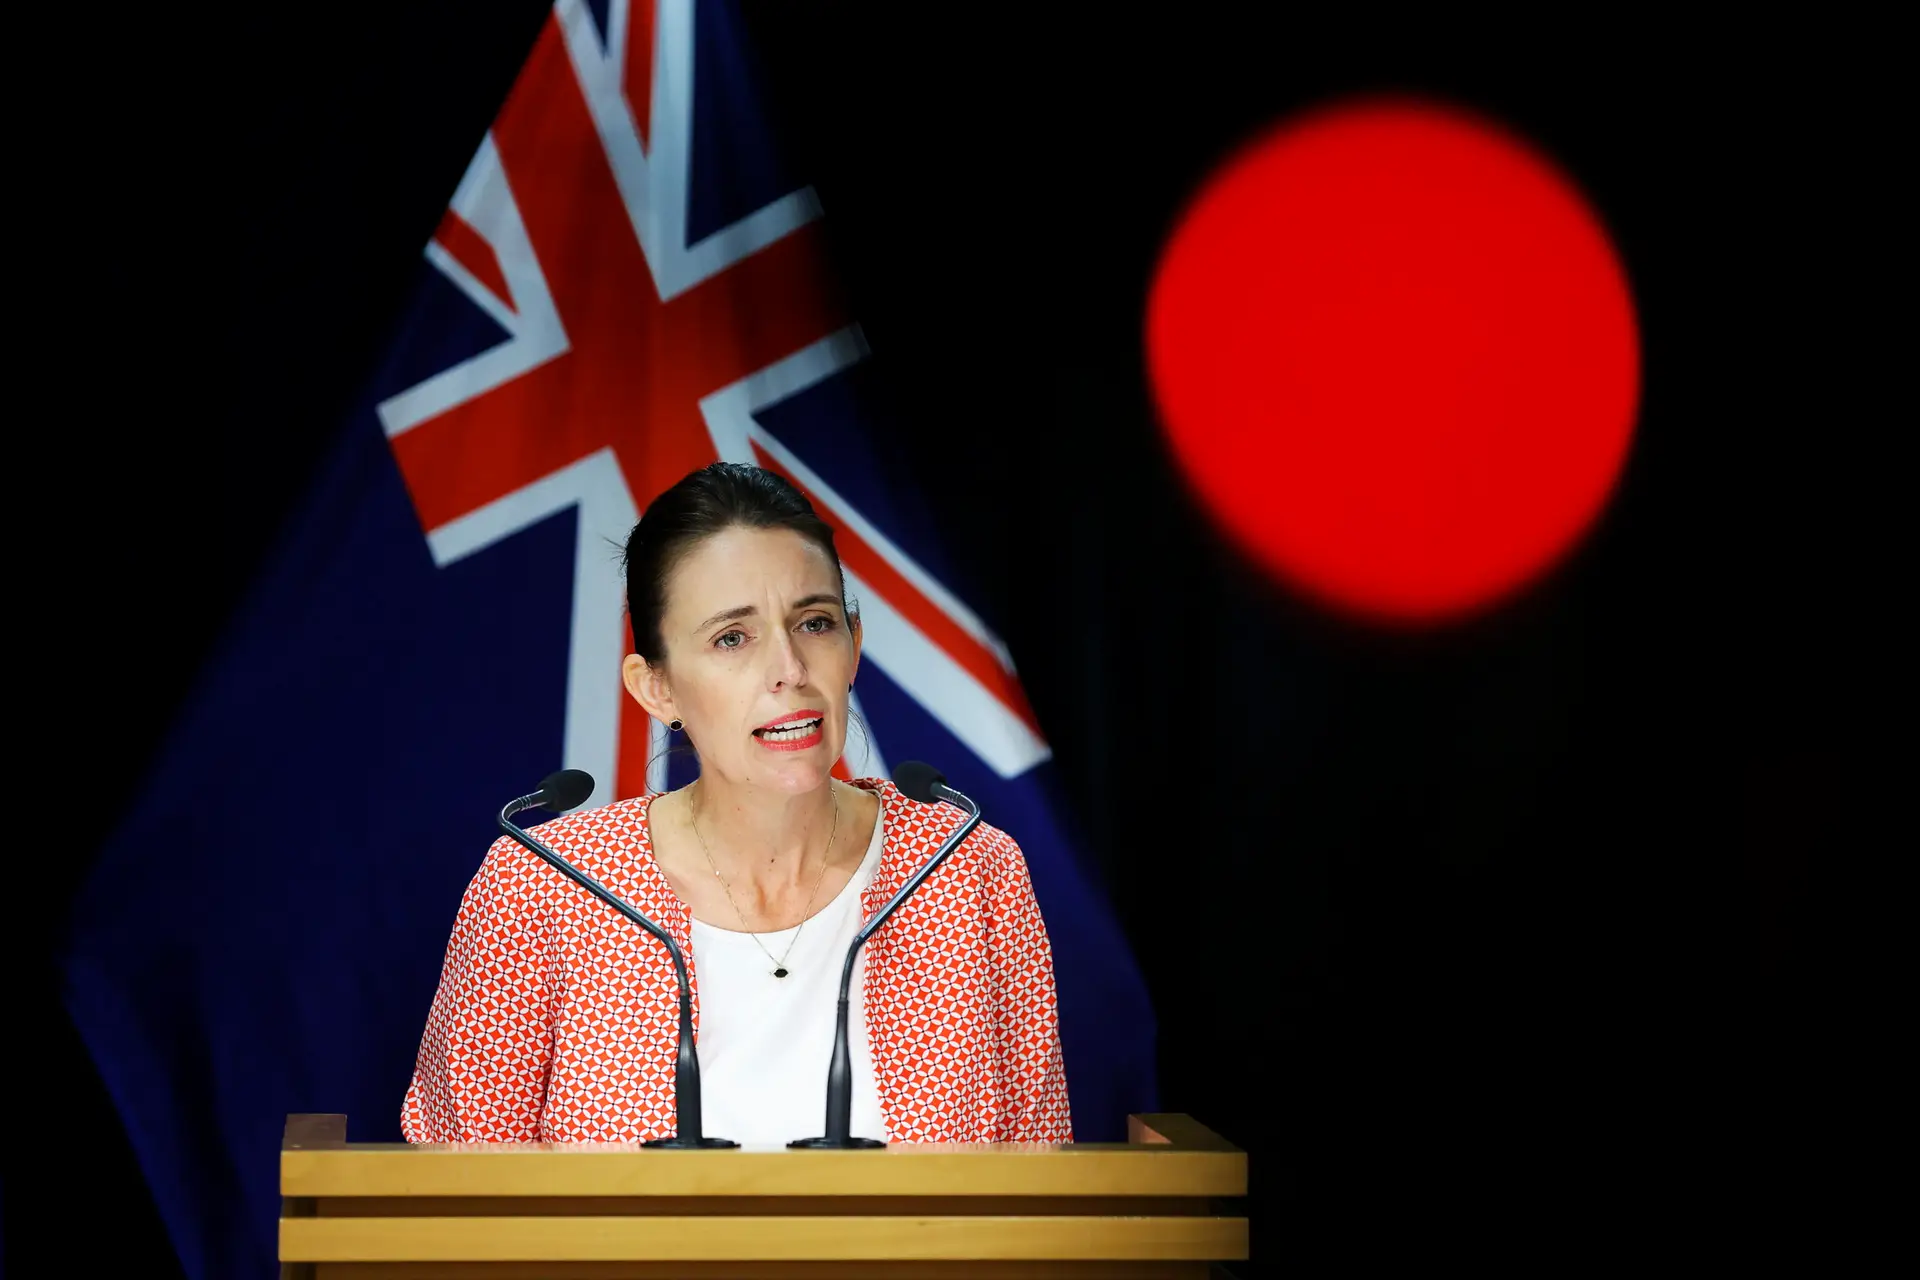 WELLINGTON, NEW ZEALAND – JANUARY 23: Prime Minister Jacinda Ardern speaks during a press conference at Parliament on January 23, 2022 in Wellington, New Zealand. Prime Minister Jacinda Ardern announced that New Zealand will be moving to the red traffic light setting at 11.59pm tonight after nine cases reported in Nelson/ Marlborough region were discovered to have the Omicron variant. (Photo by Hagen Hopkins/Getty Images)